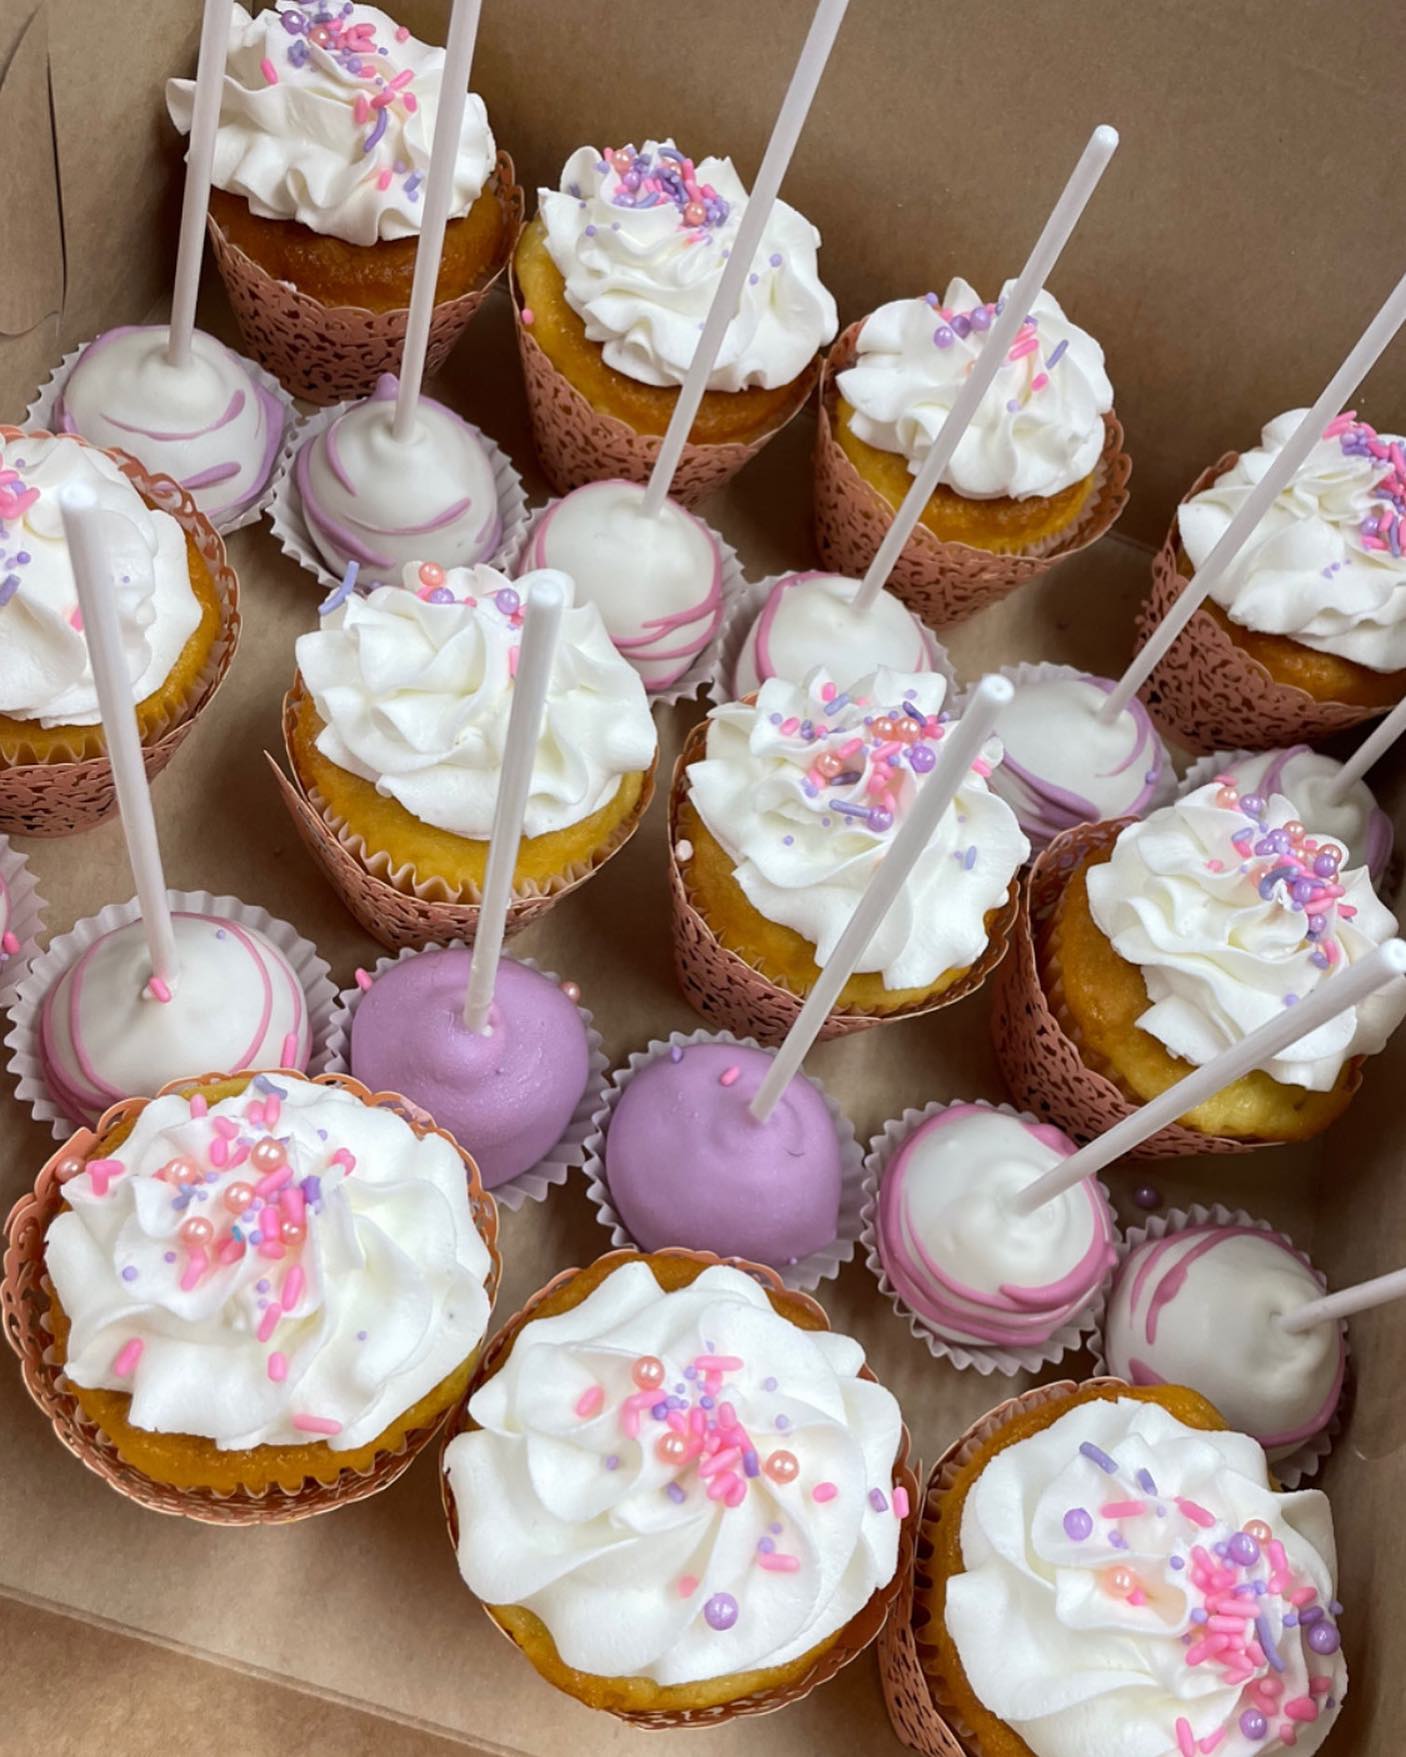 a box full of cupcakes with white frosting and sprinkles.